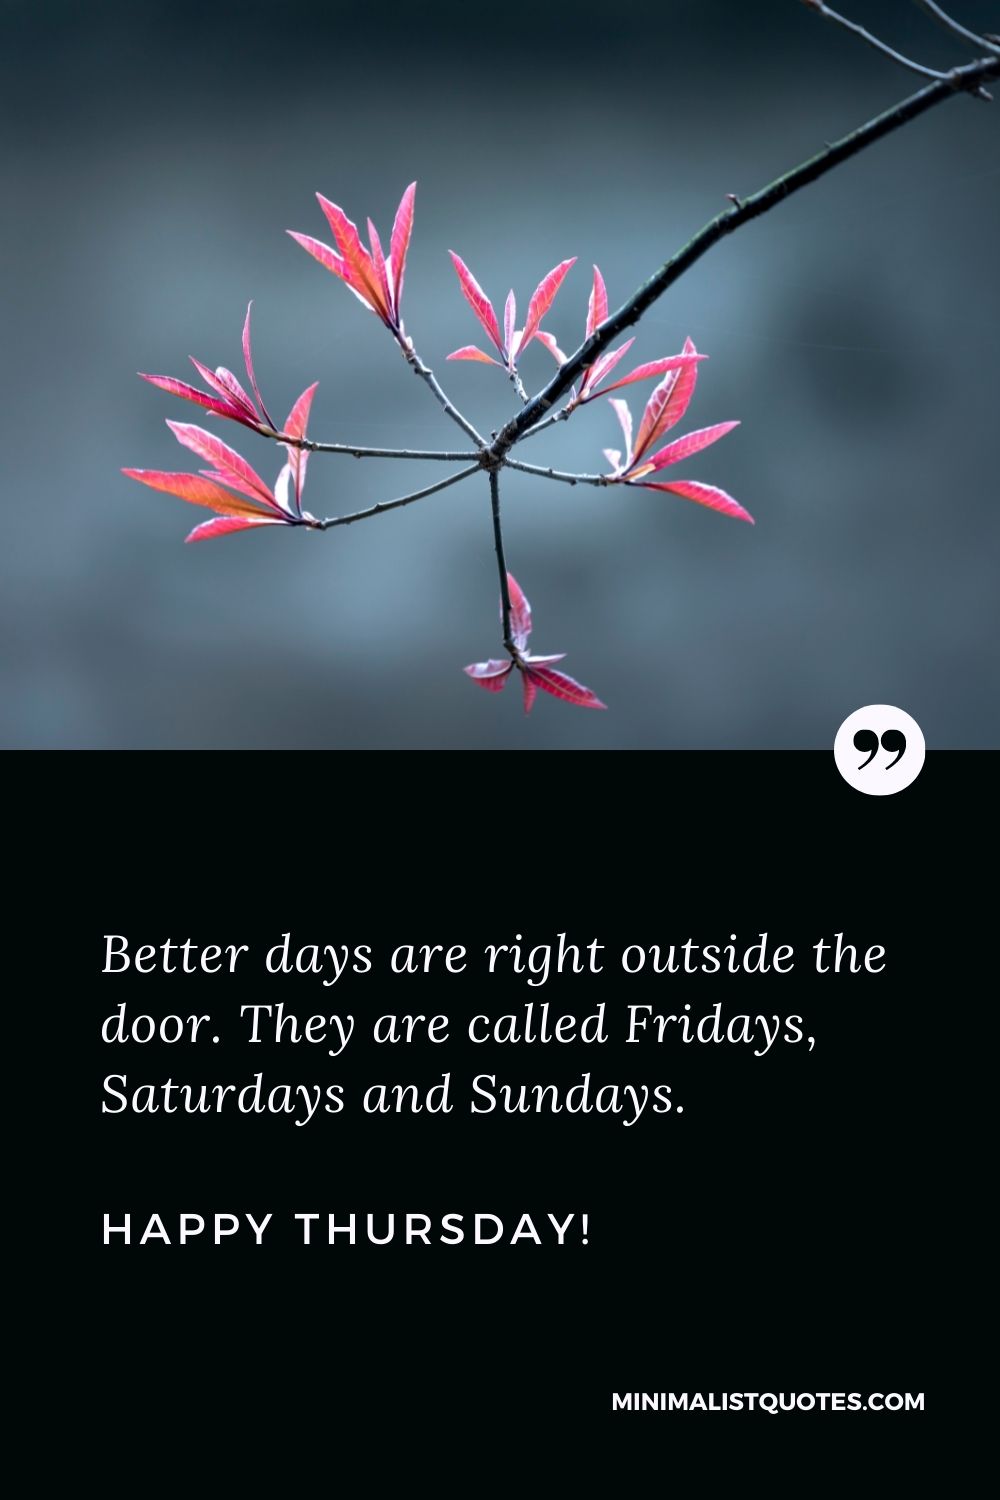 Thursday blessing quotes: Better days are right outside the door. They are called Fridays, Saturdays and Sundays. Happy Thursday!